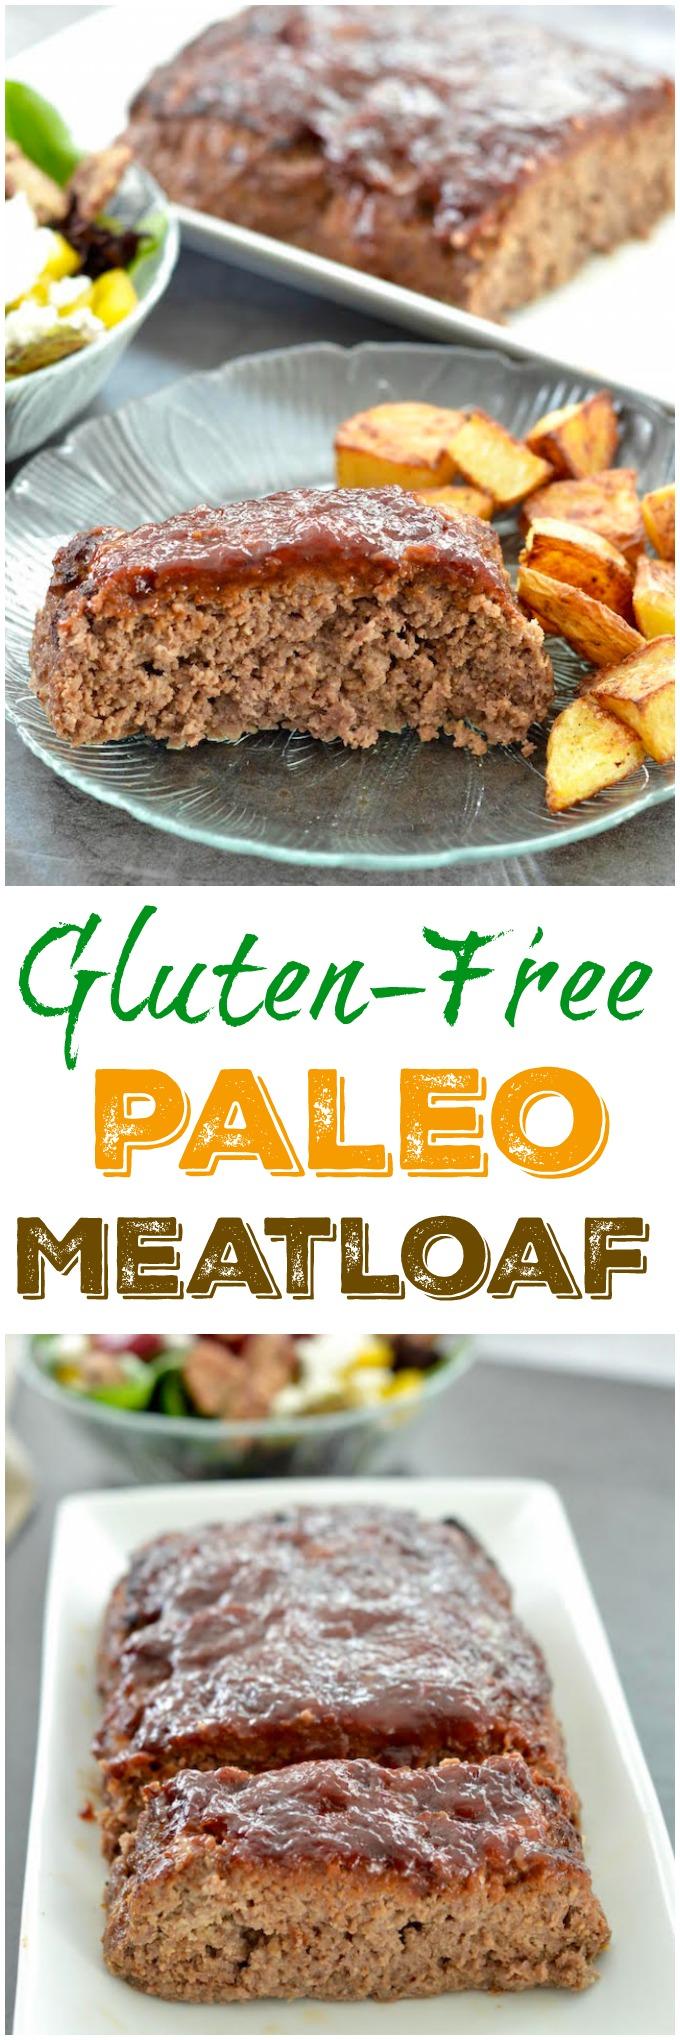 This Gluten-Free Paleo Meatloaf recipe is the perfect family dinner. Make it ahead of time and reheat on a busy night. 